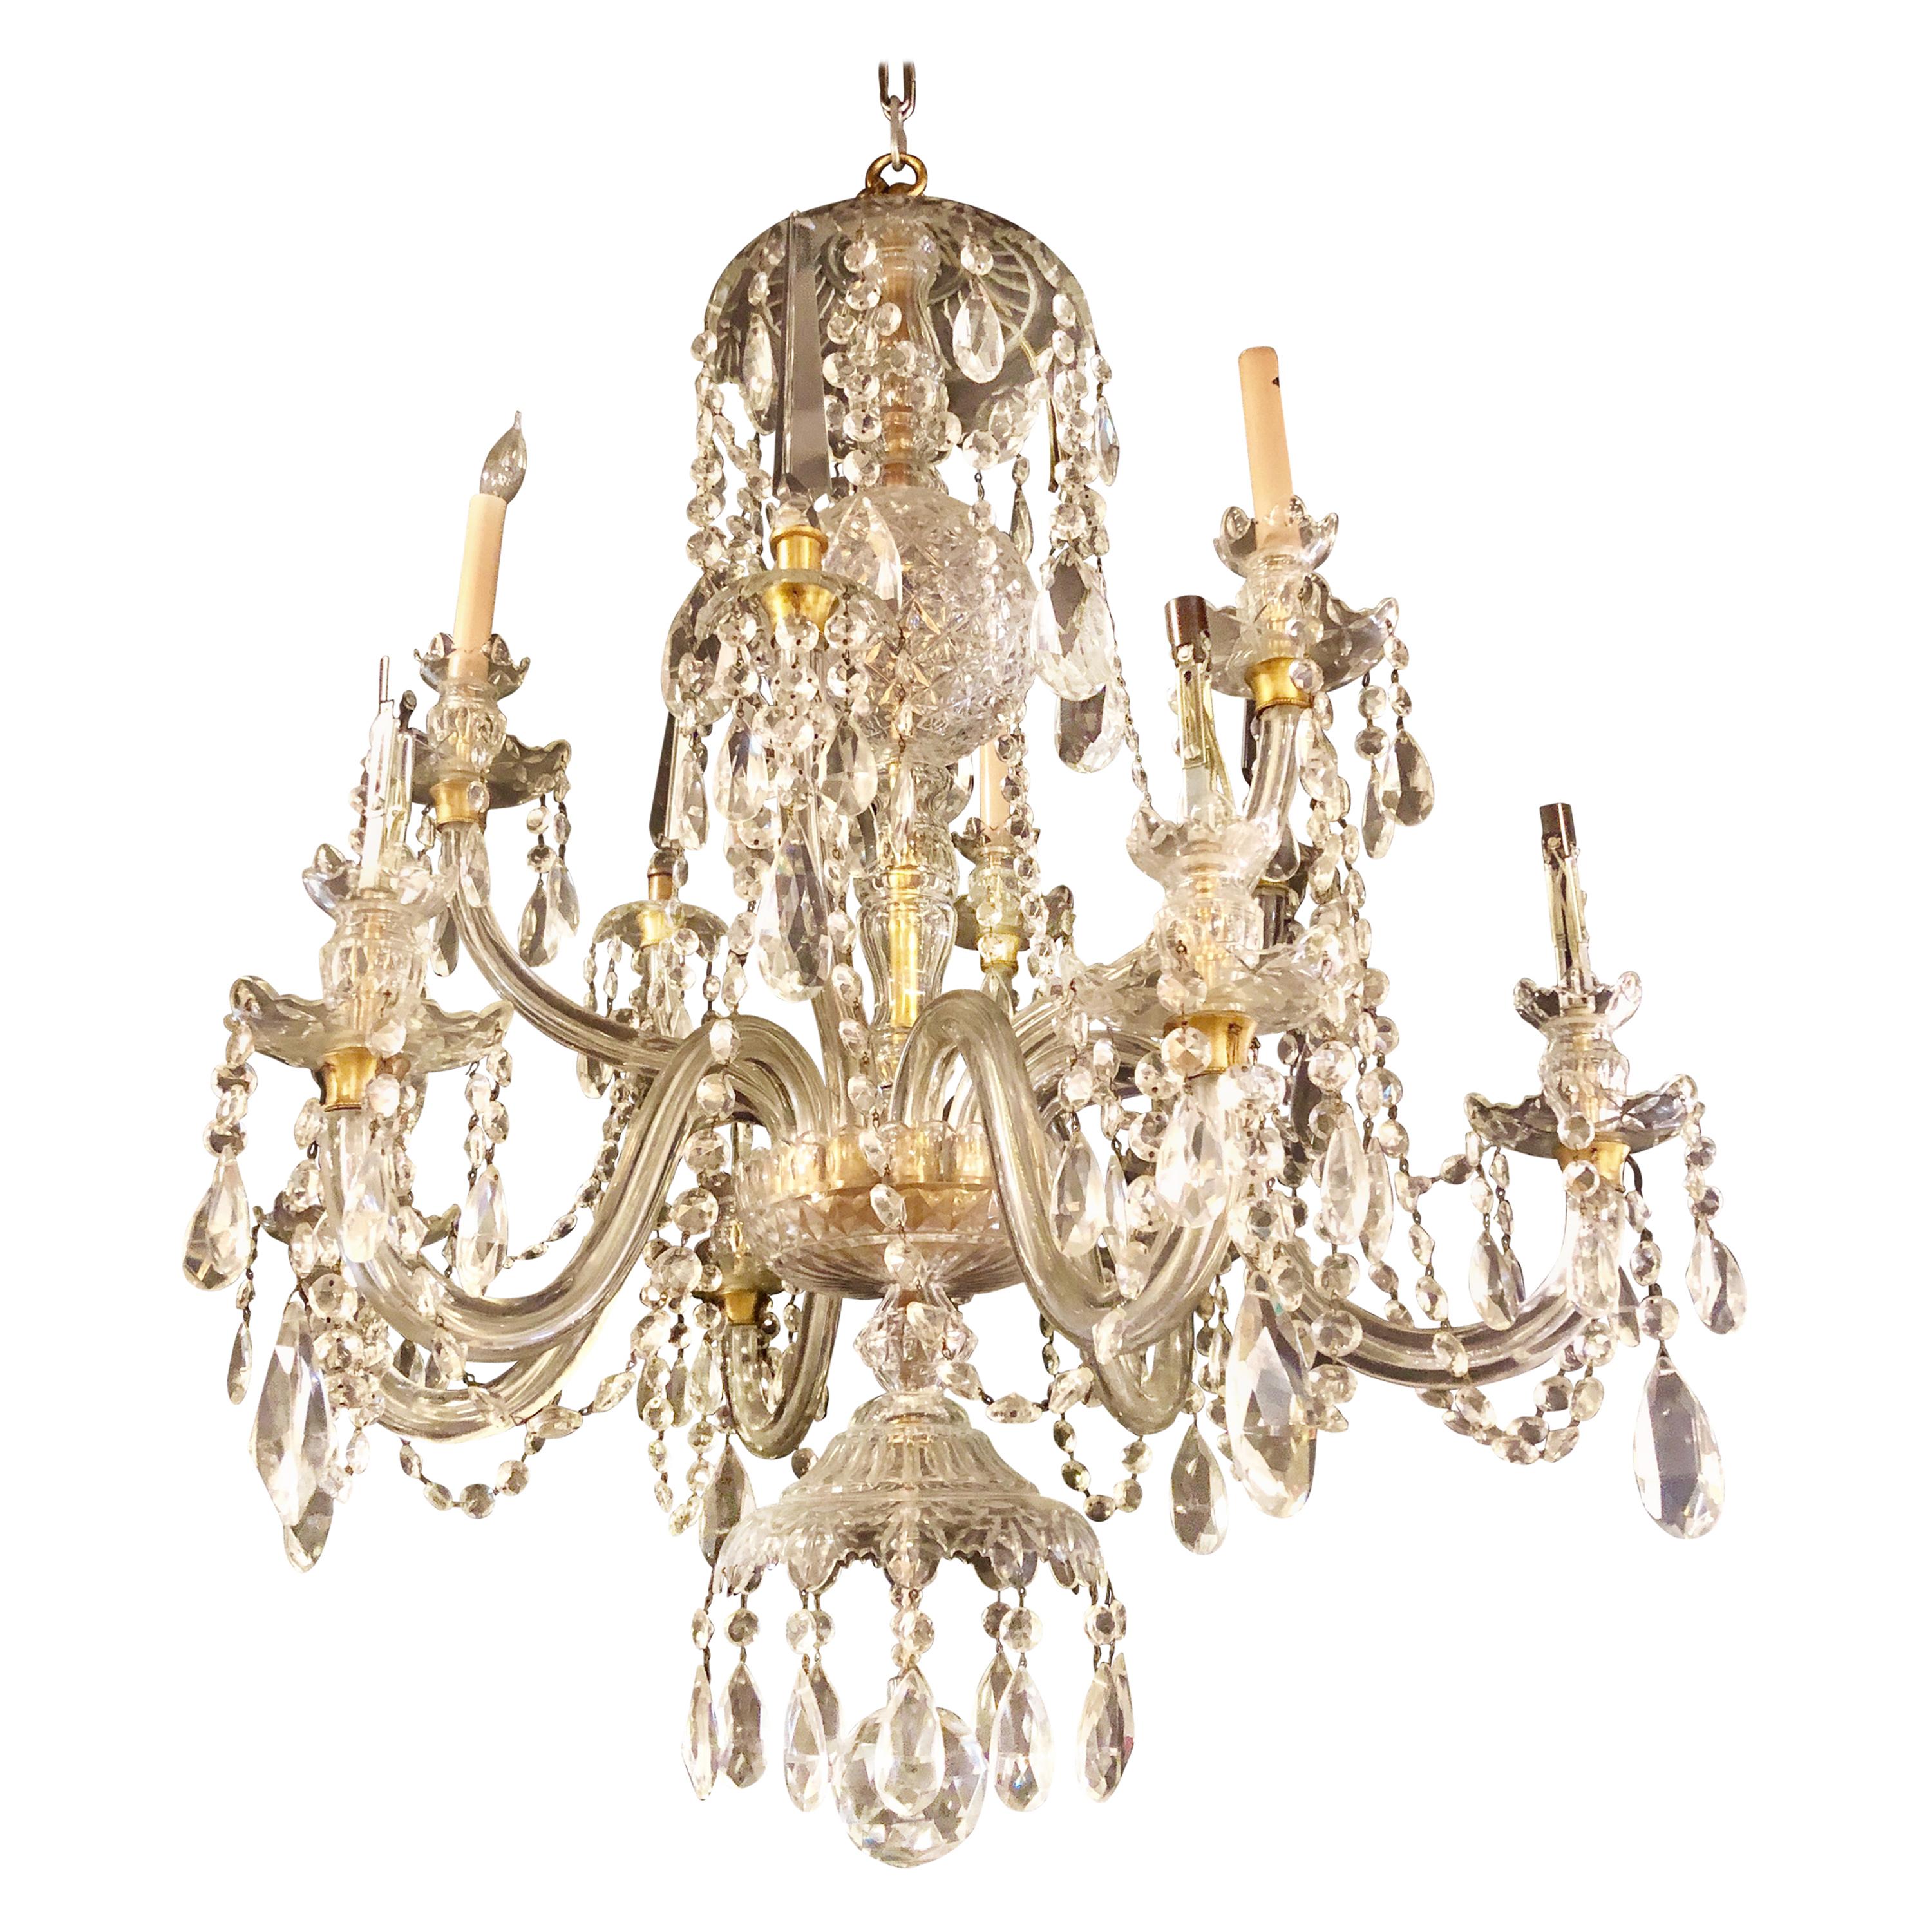 Waterford Style 1940 Cut Crystal Chandelier with Palatial Center Column Sphere